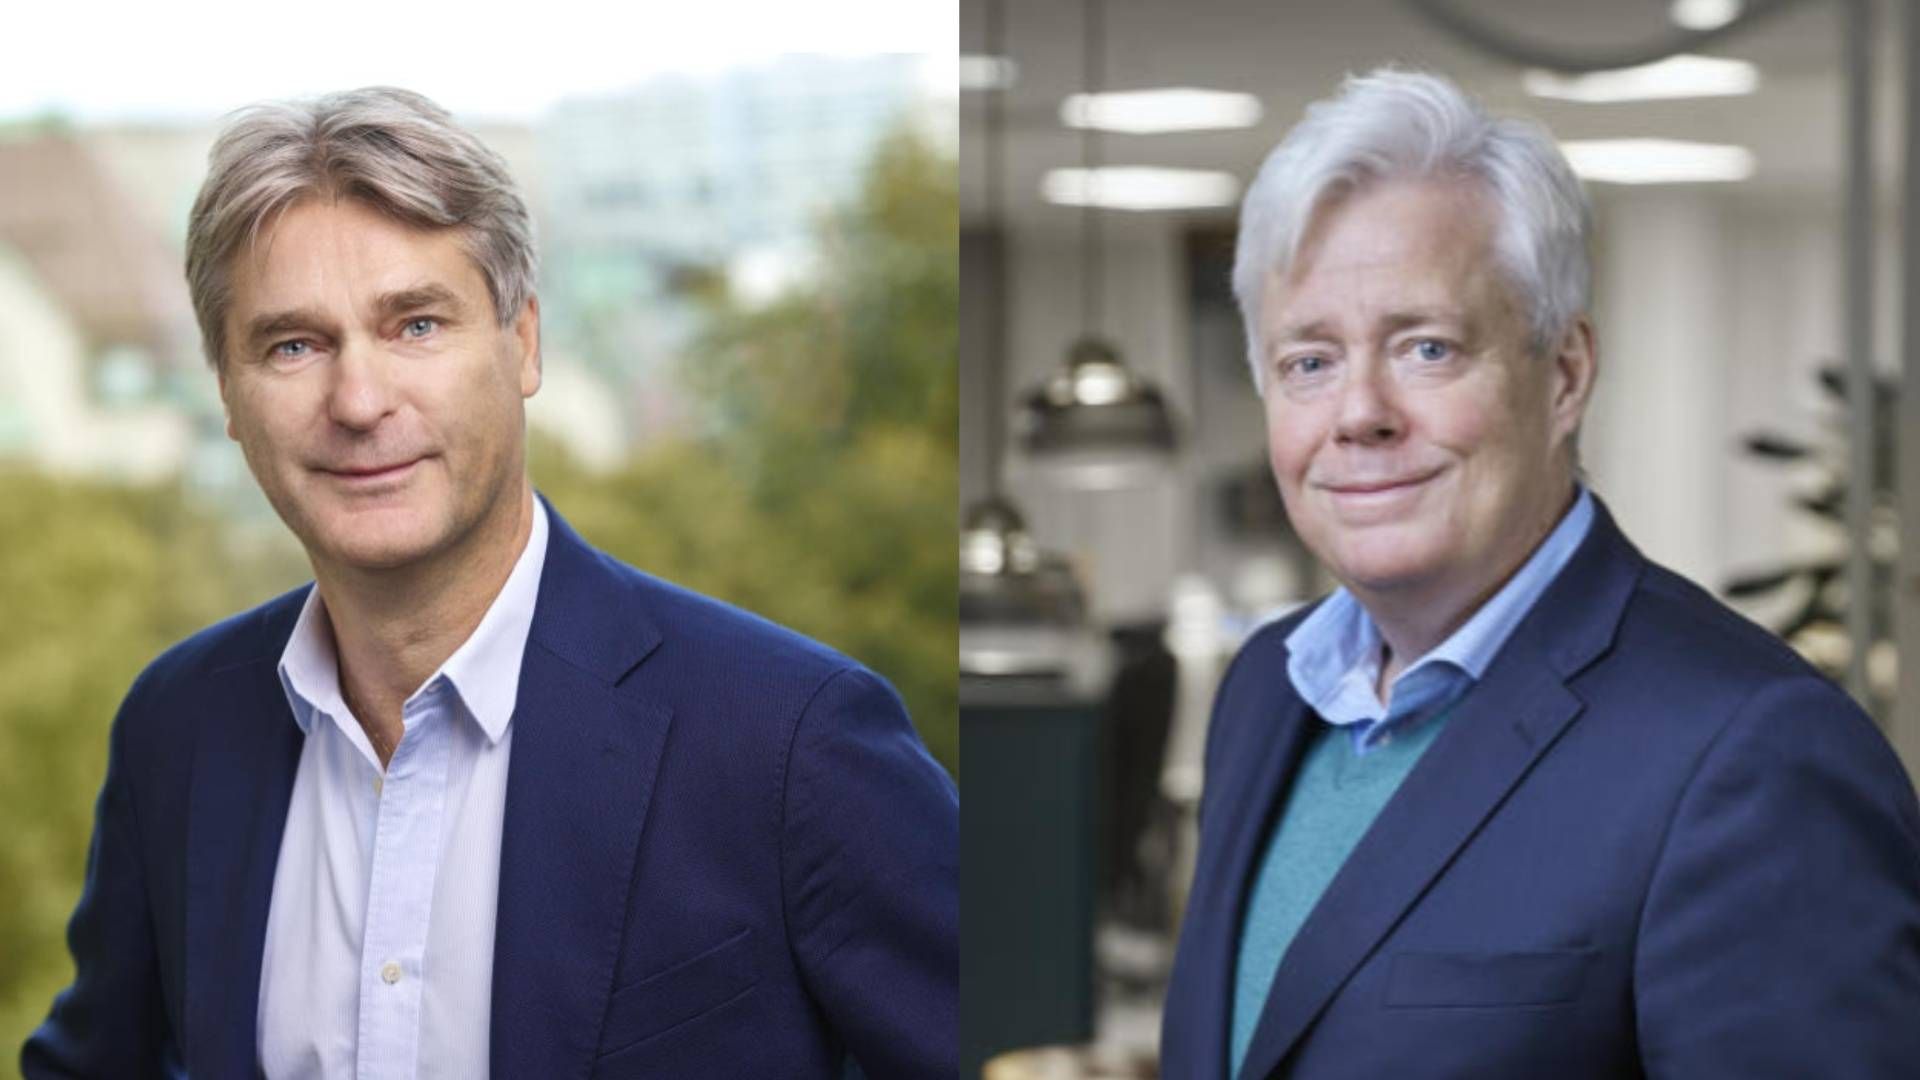 Richard Gröttheim (left), the former CEO of AP7, was an award winner. So was the AP4 buffer fund, headed by CEO Niklas Ekvall (right). | Photo: PR / AP7 and AP4